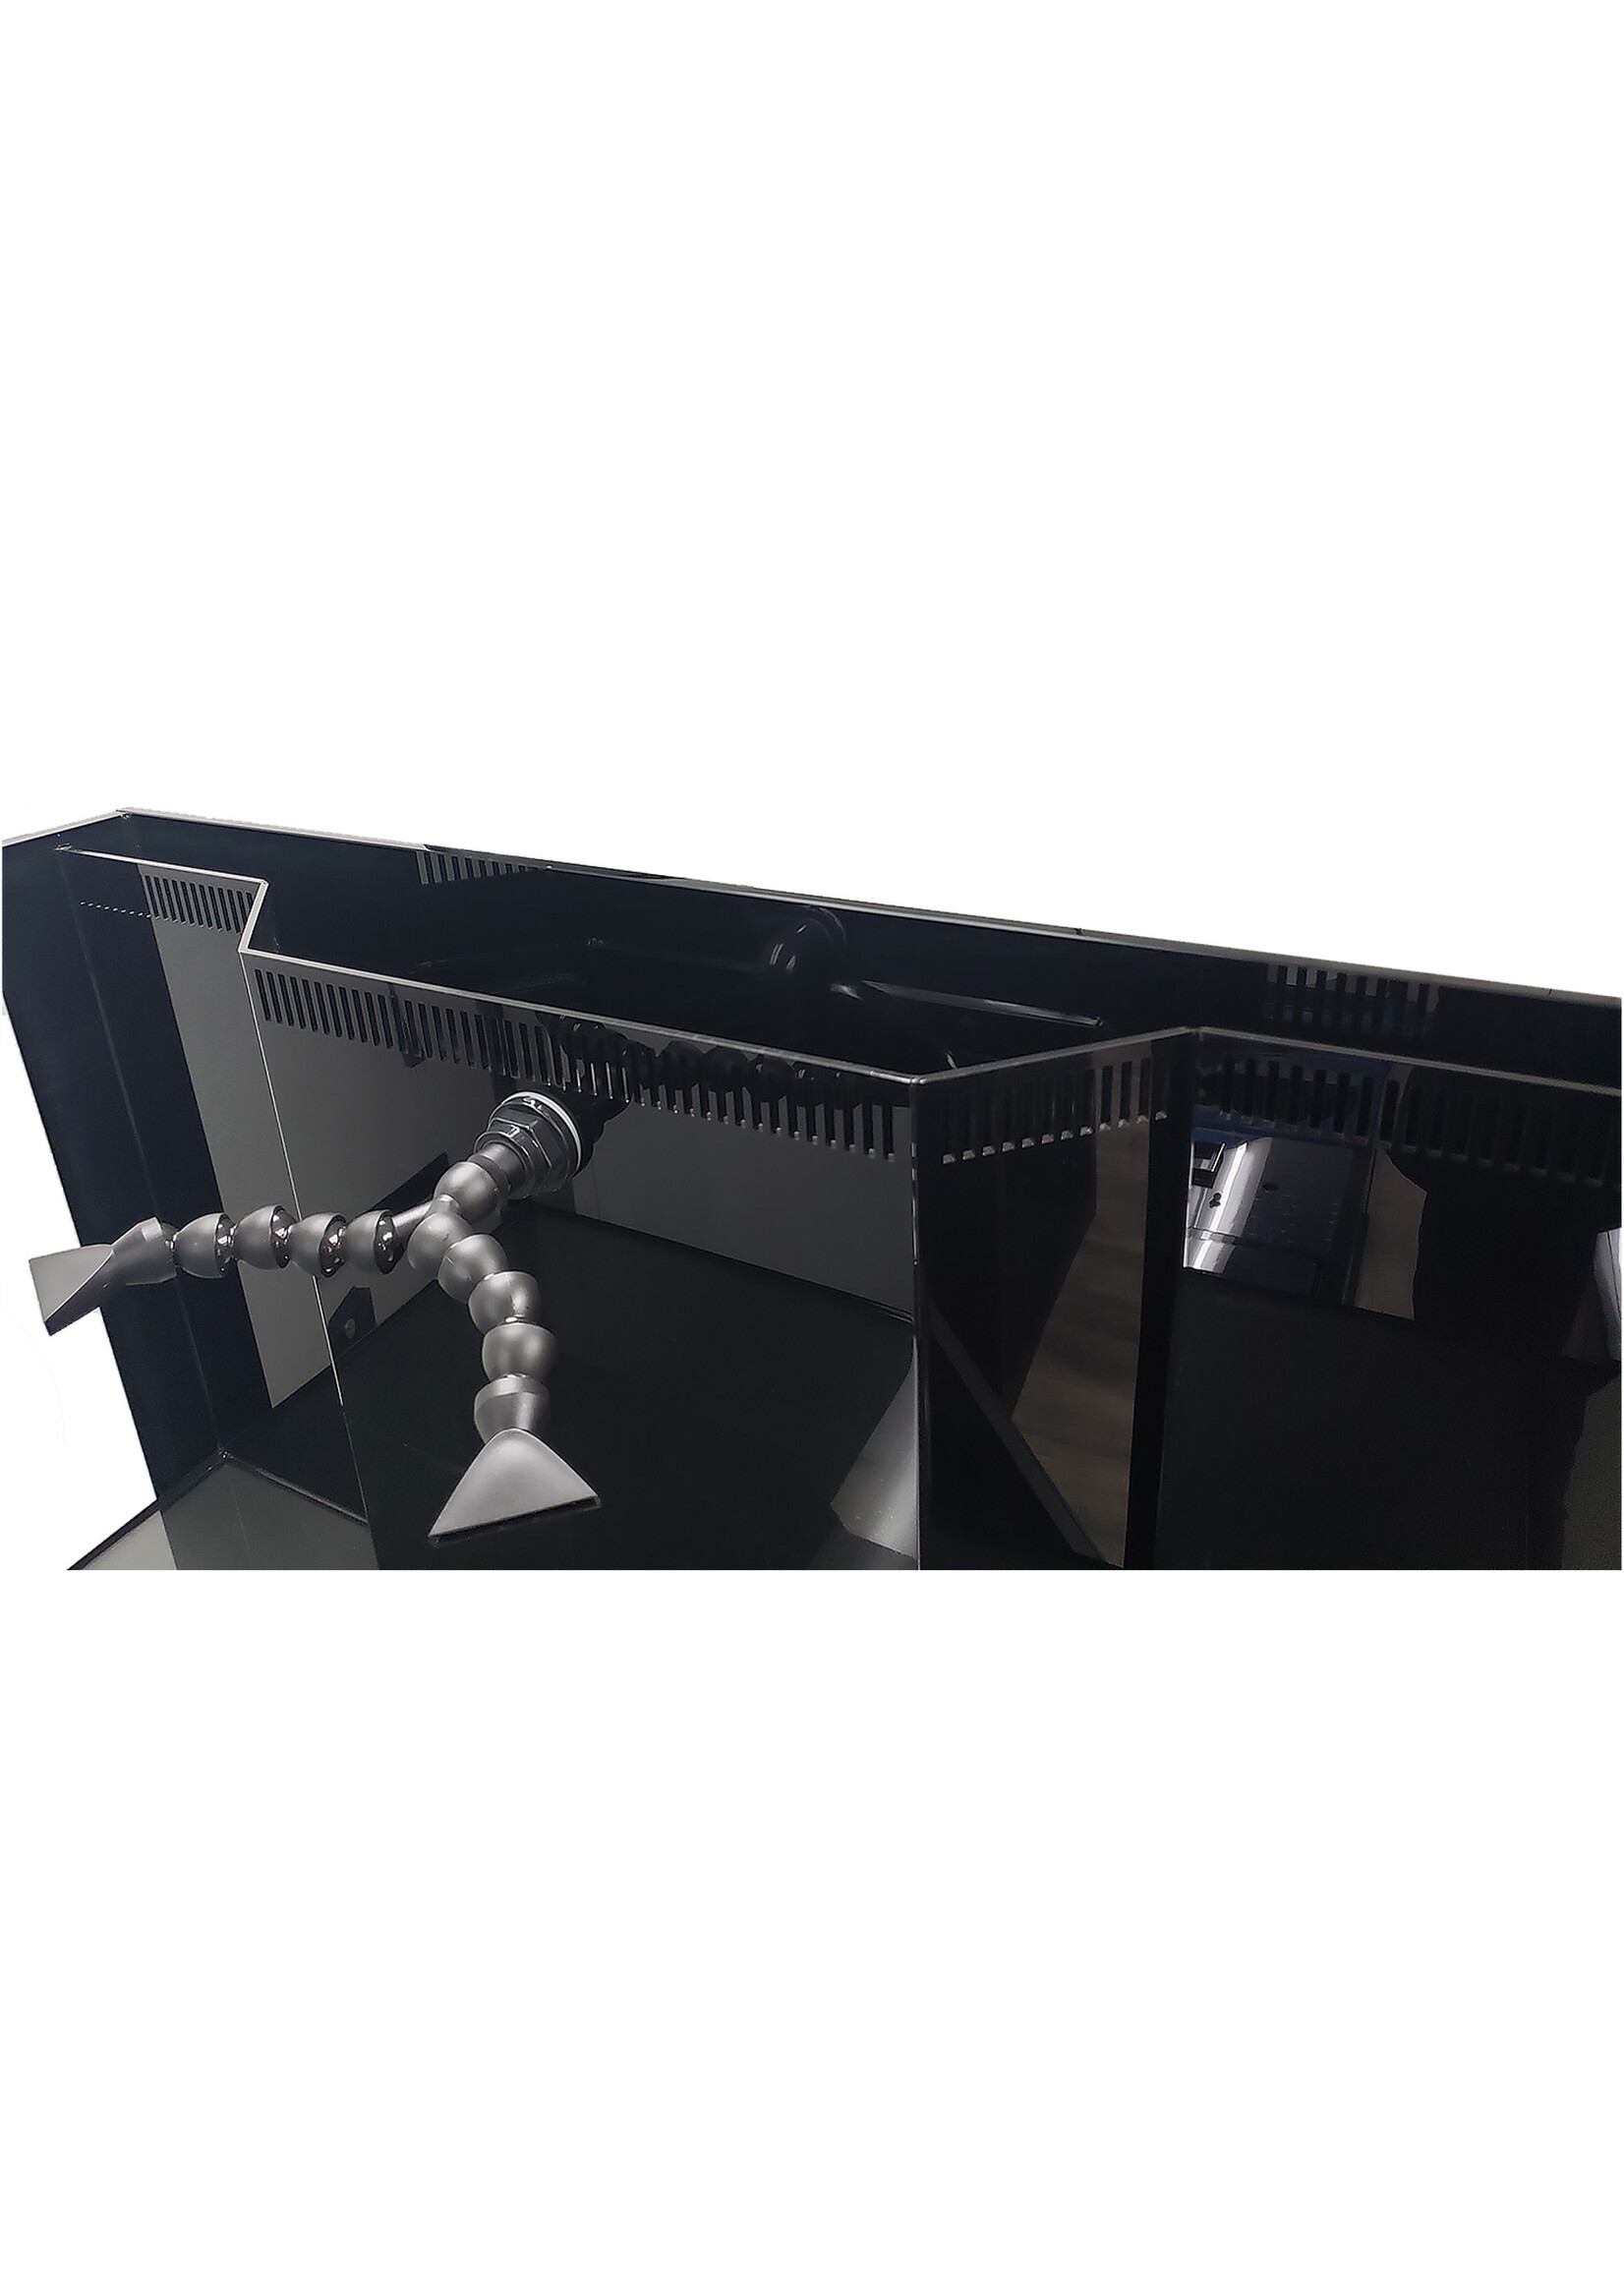 Innovative Marine INT 200 AQUARIUM WITH APS STAND WHITE (MADE TO ORDER)